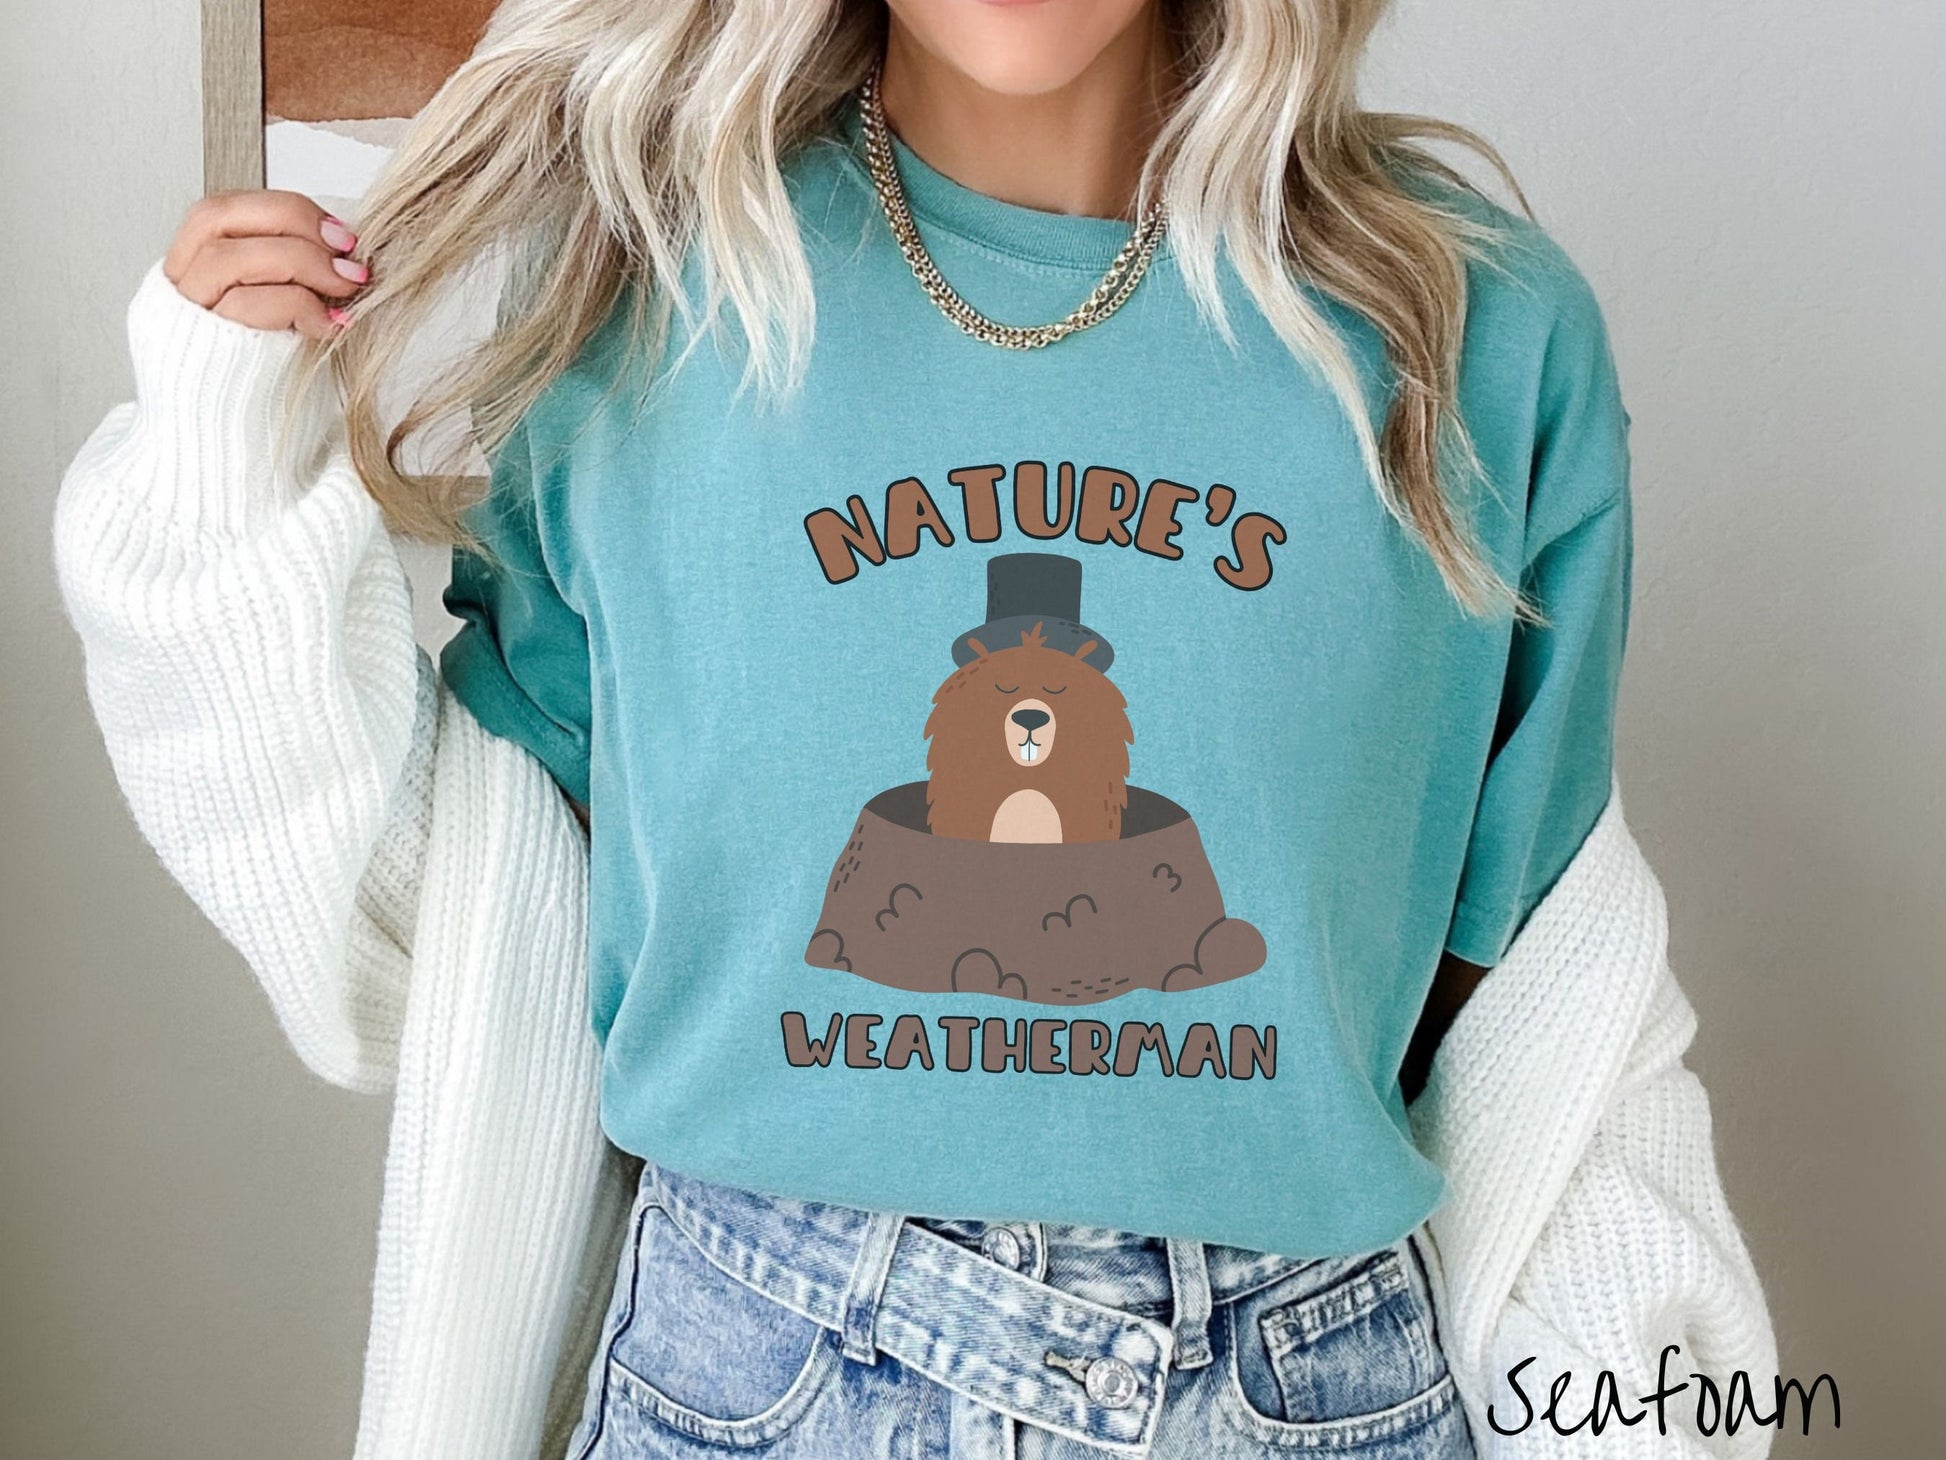 A woman wearing a cute seafoam colored shirt with the text Natures Weatherman sandwiching Phil the Punxsutawney PA groundhog who is wearing a black top hat and is coming out of his hole for Groundhogs Day.